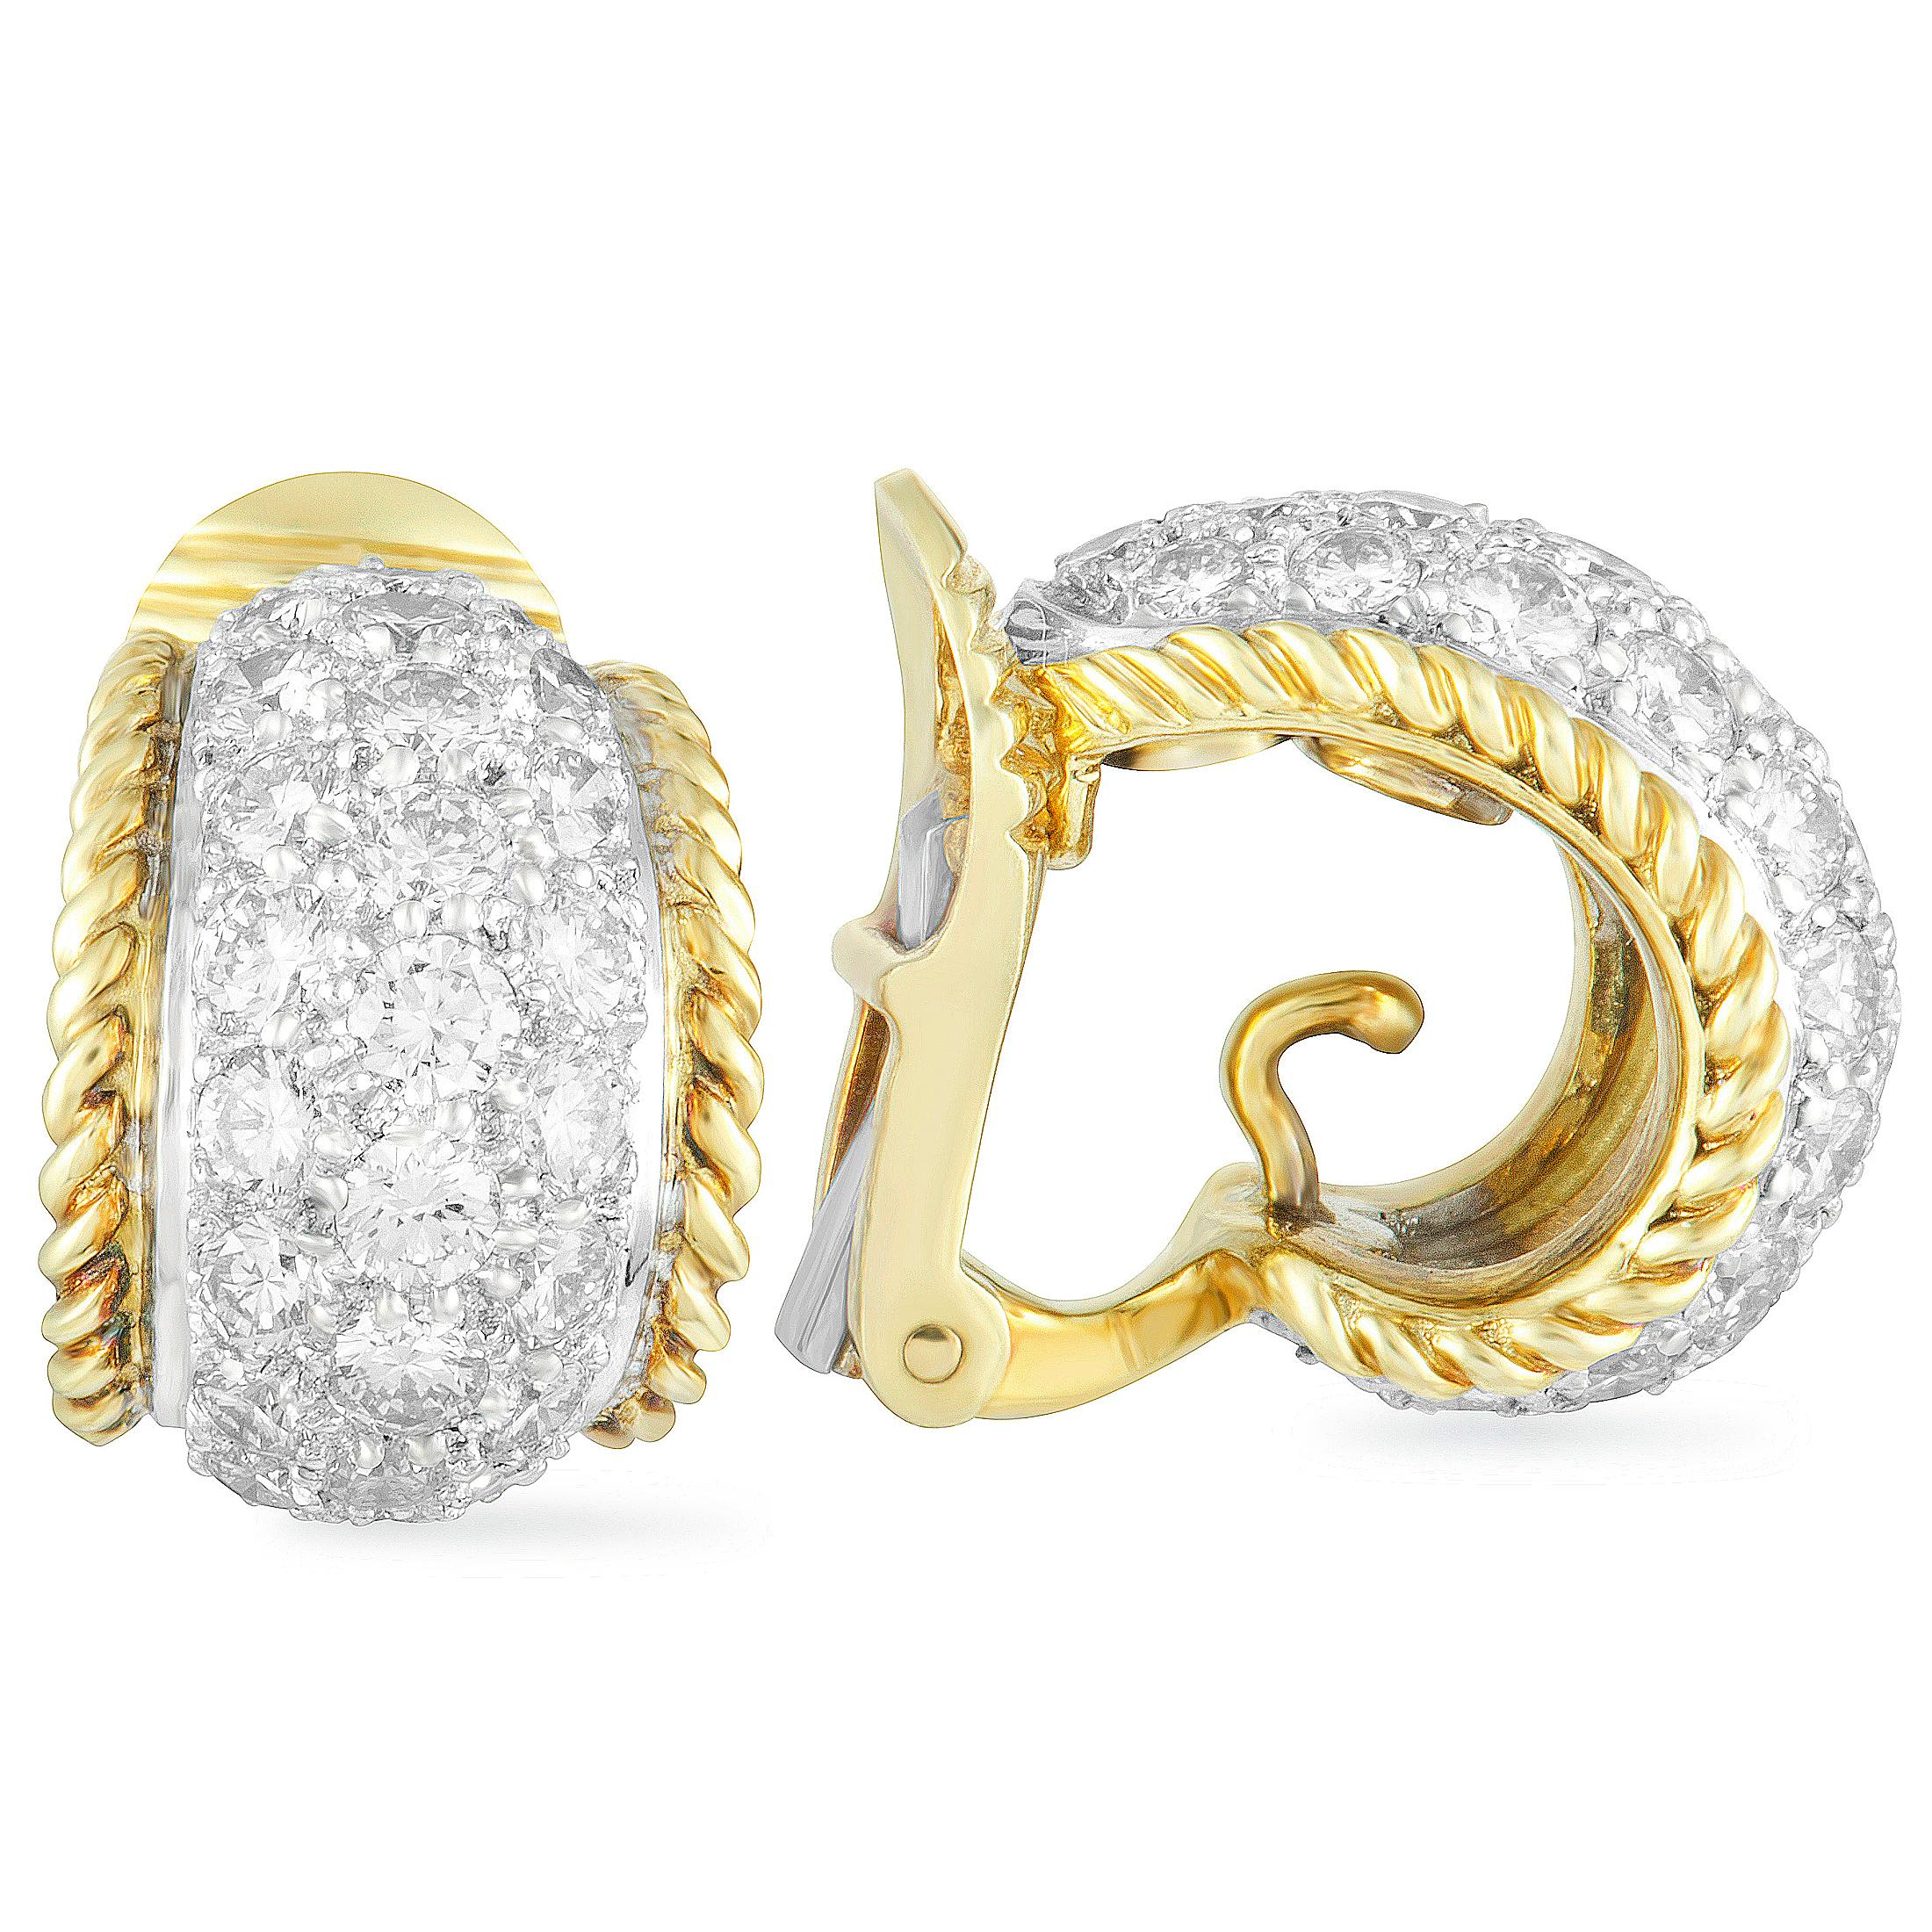 Exquisitely crafted from platinum and 18K yellow gold and embellished in a most luxurious manner, these stunning earrings designed by Tiffany & Co. offer an exceptionally prestigious appearance. The pair is decorated with colorless (grade F) diamond